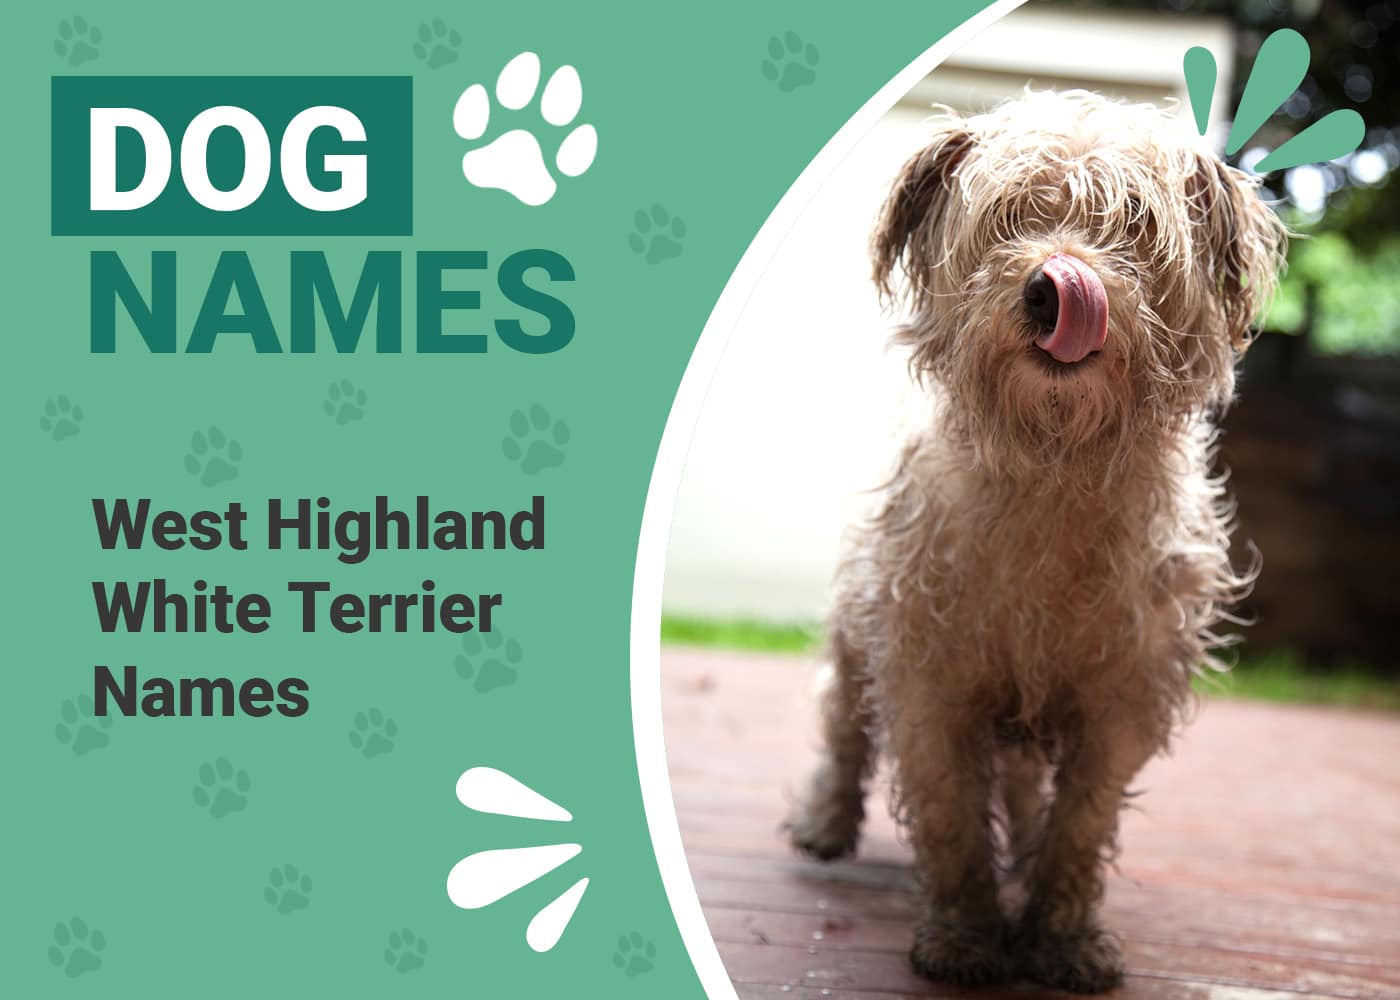 West Highland White Terrier Names